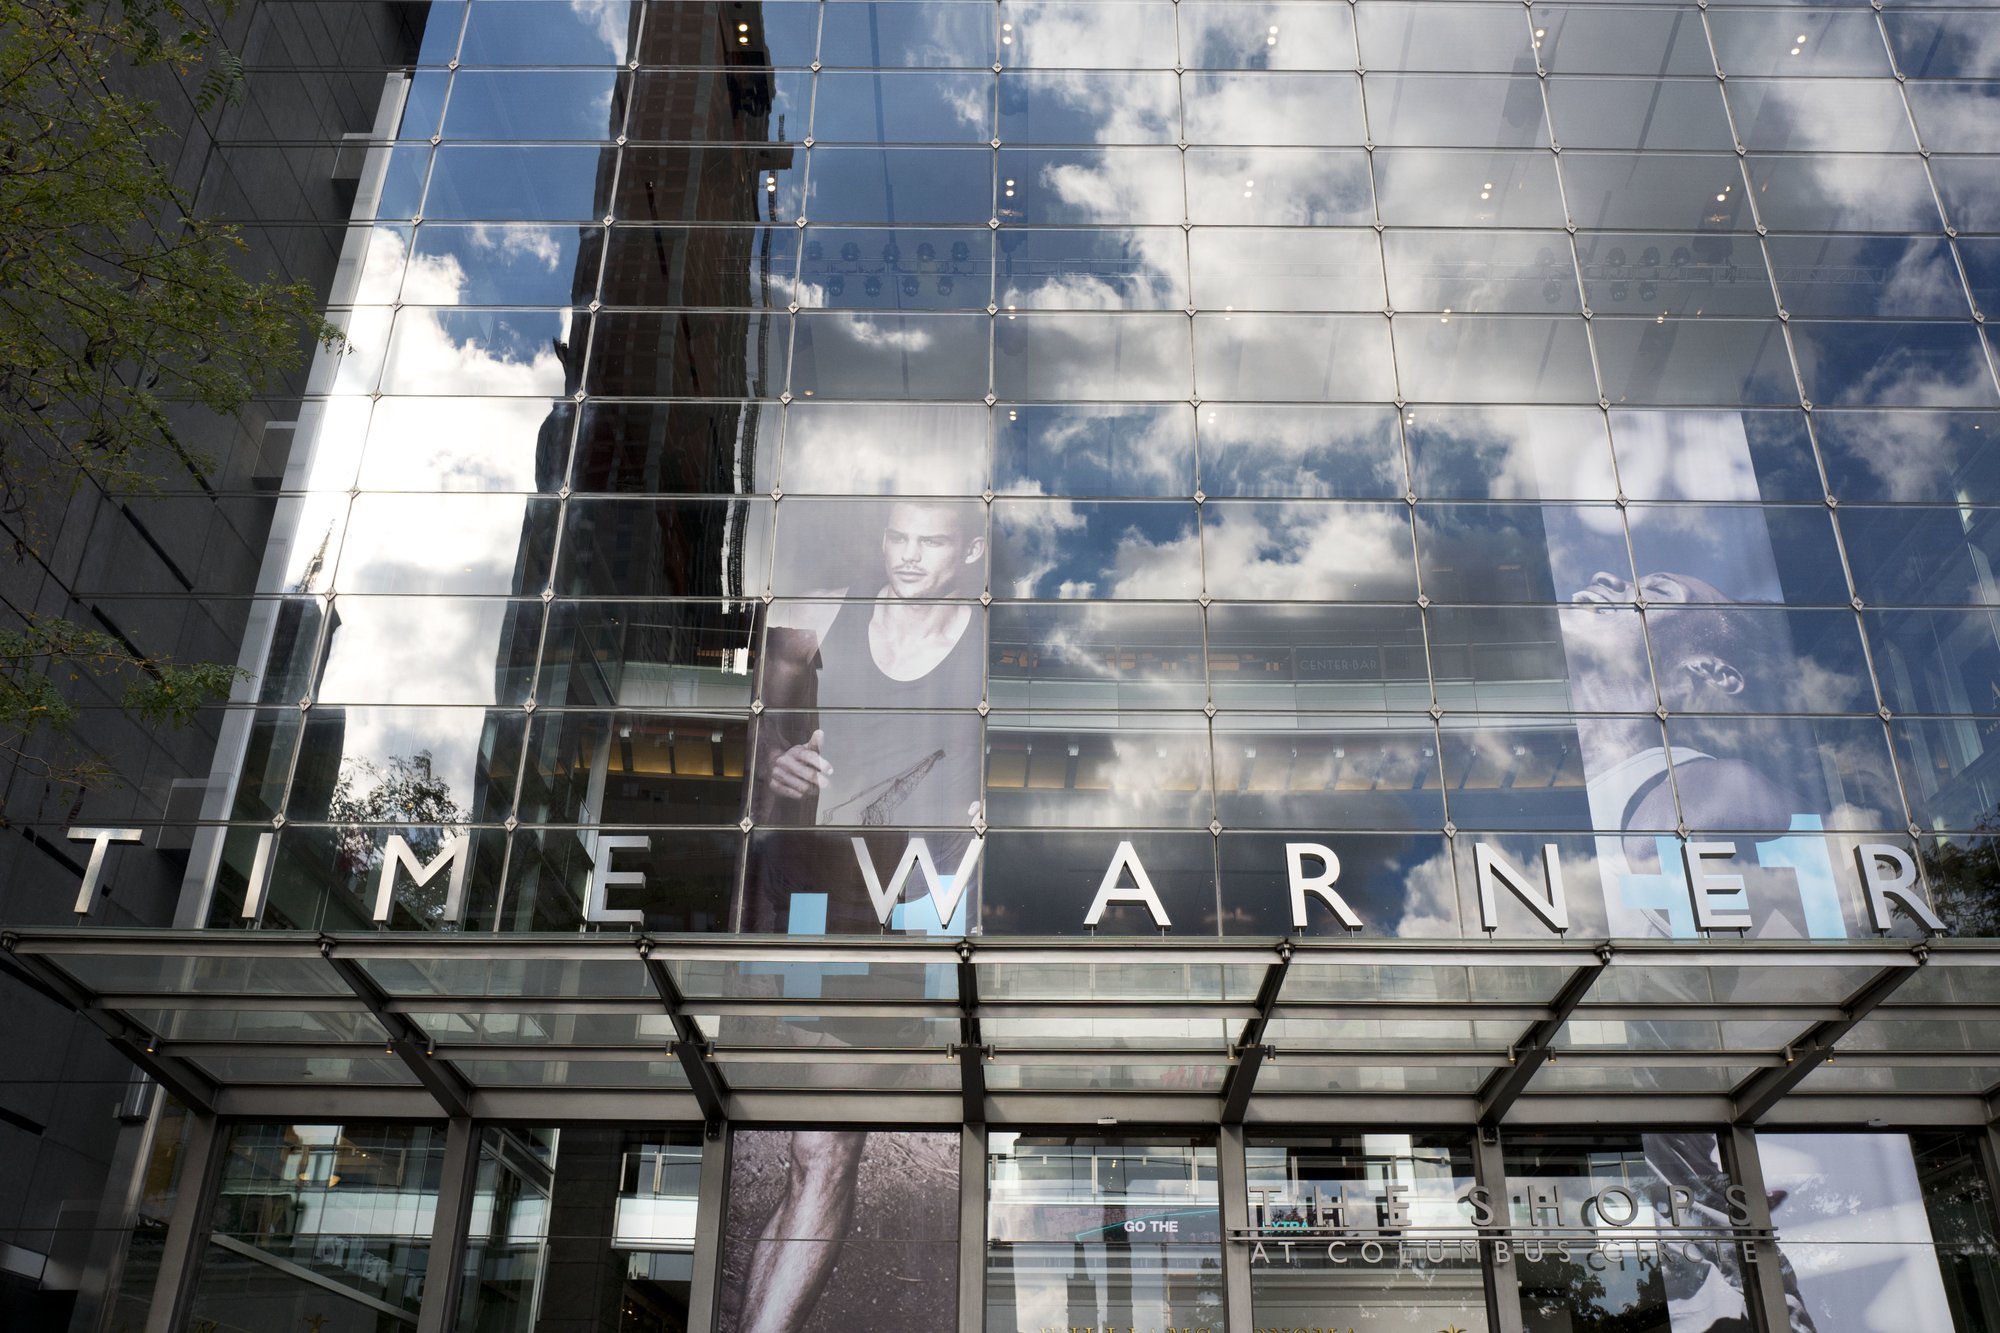 FILE - In this Oct. 24, 2016, file photo, clouds are reflected in the glass facade of the Time Warner building in New York. A federal appeals court on Tuesday, Feb. 26, 2019 upheld AT&T's $81 billion takeover of Time Warner, approving one of the biggest media deals on record in the face of opposition from the Trump administration. The combination of one of the country's largest wireless carriers and TV providers with a major TV and movie company has already reshaped the media landscape. (AP Photo/Mark Lennihan, File)